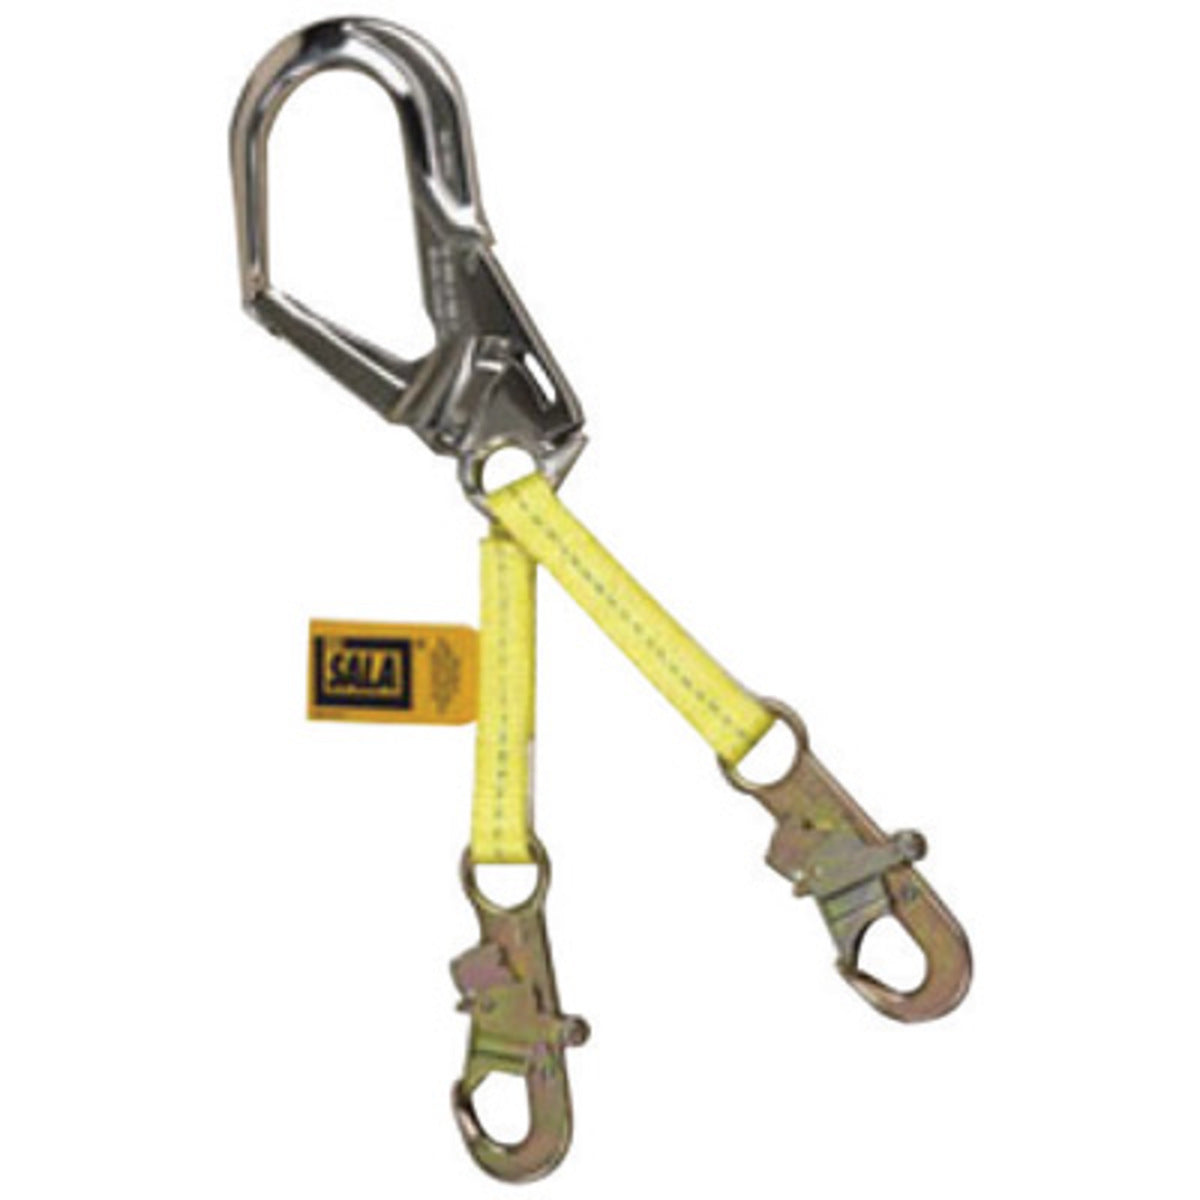 Protecta 1351001 Web Rebar/Positioning Lanyard 24 in. - Industrial Safety  Products